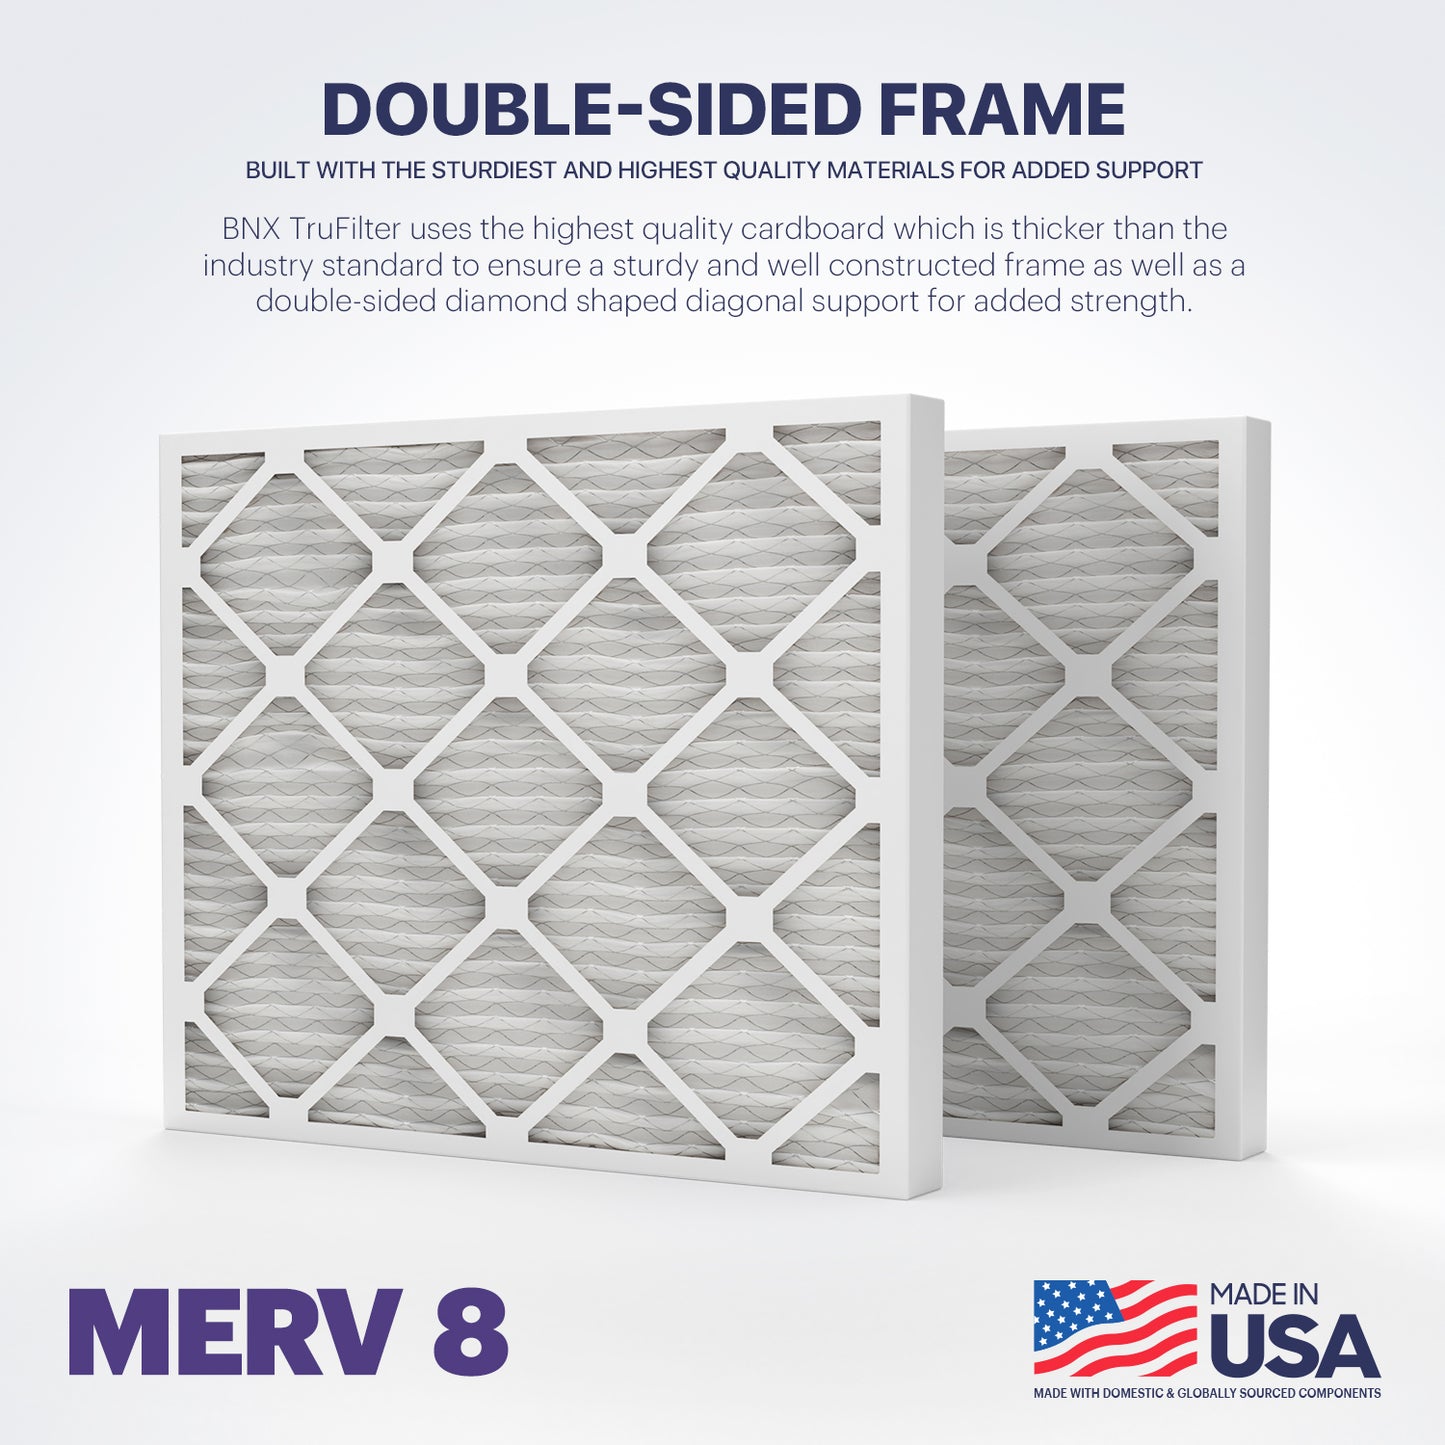 BNX TruFilter 20x20x2 MERV 8 Pleated Air Filter – Made in USA (2-Pack)